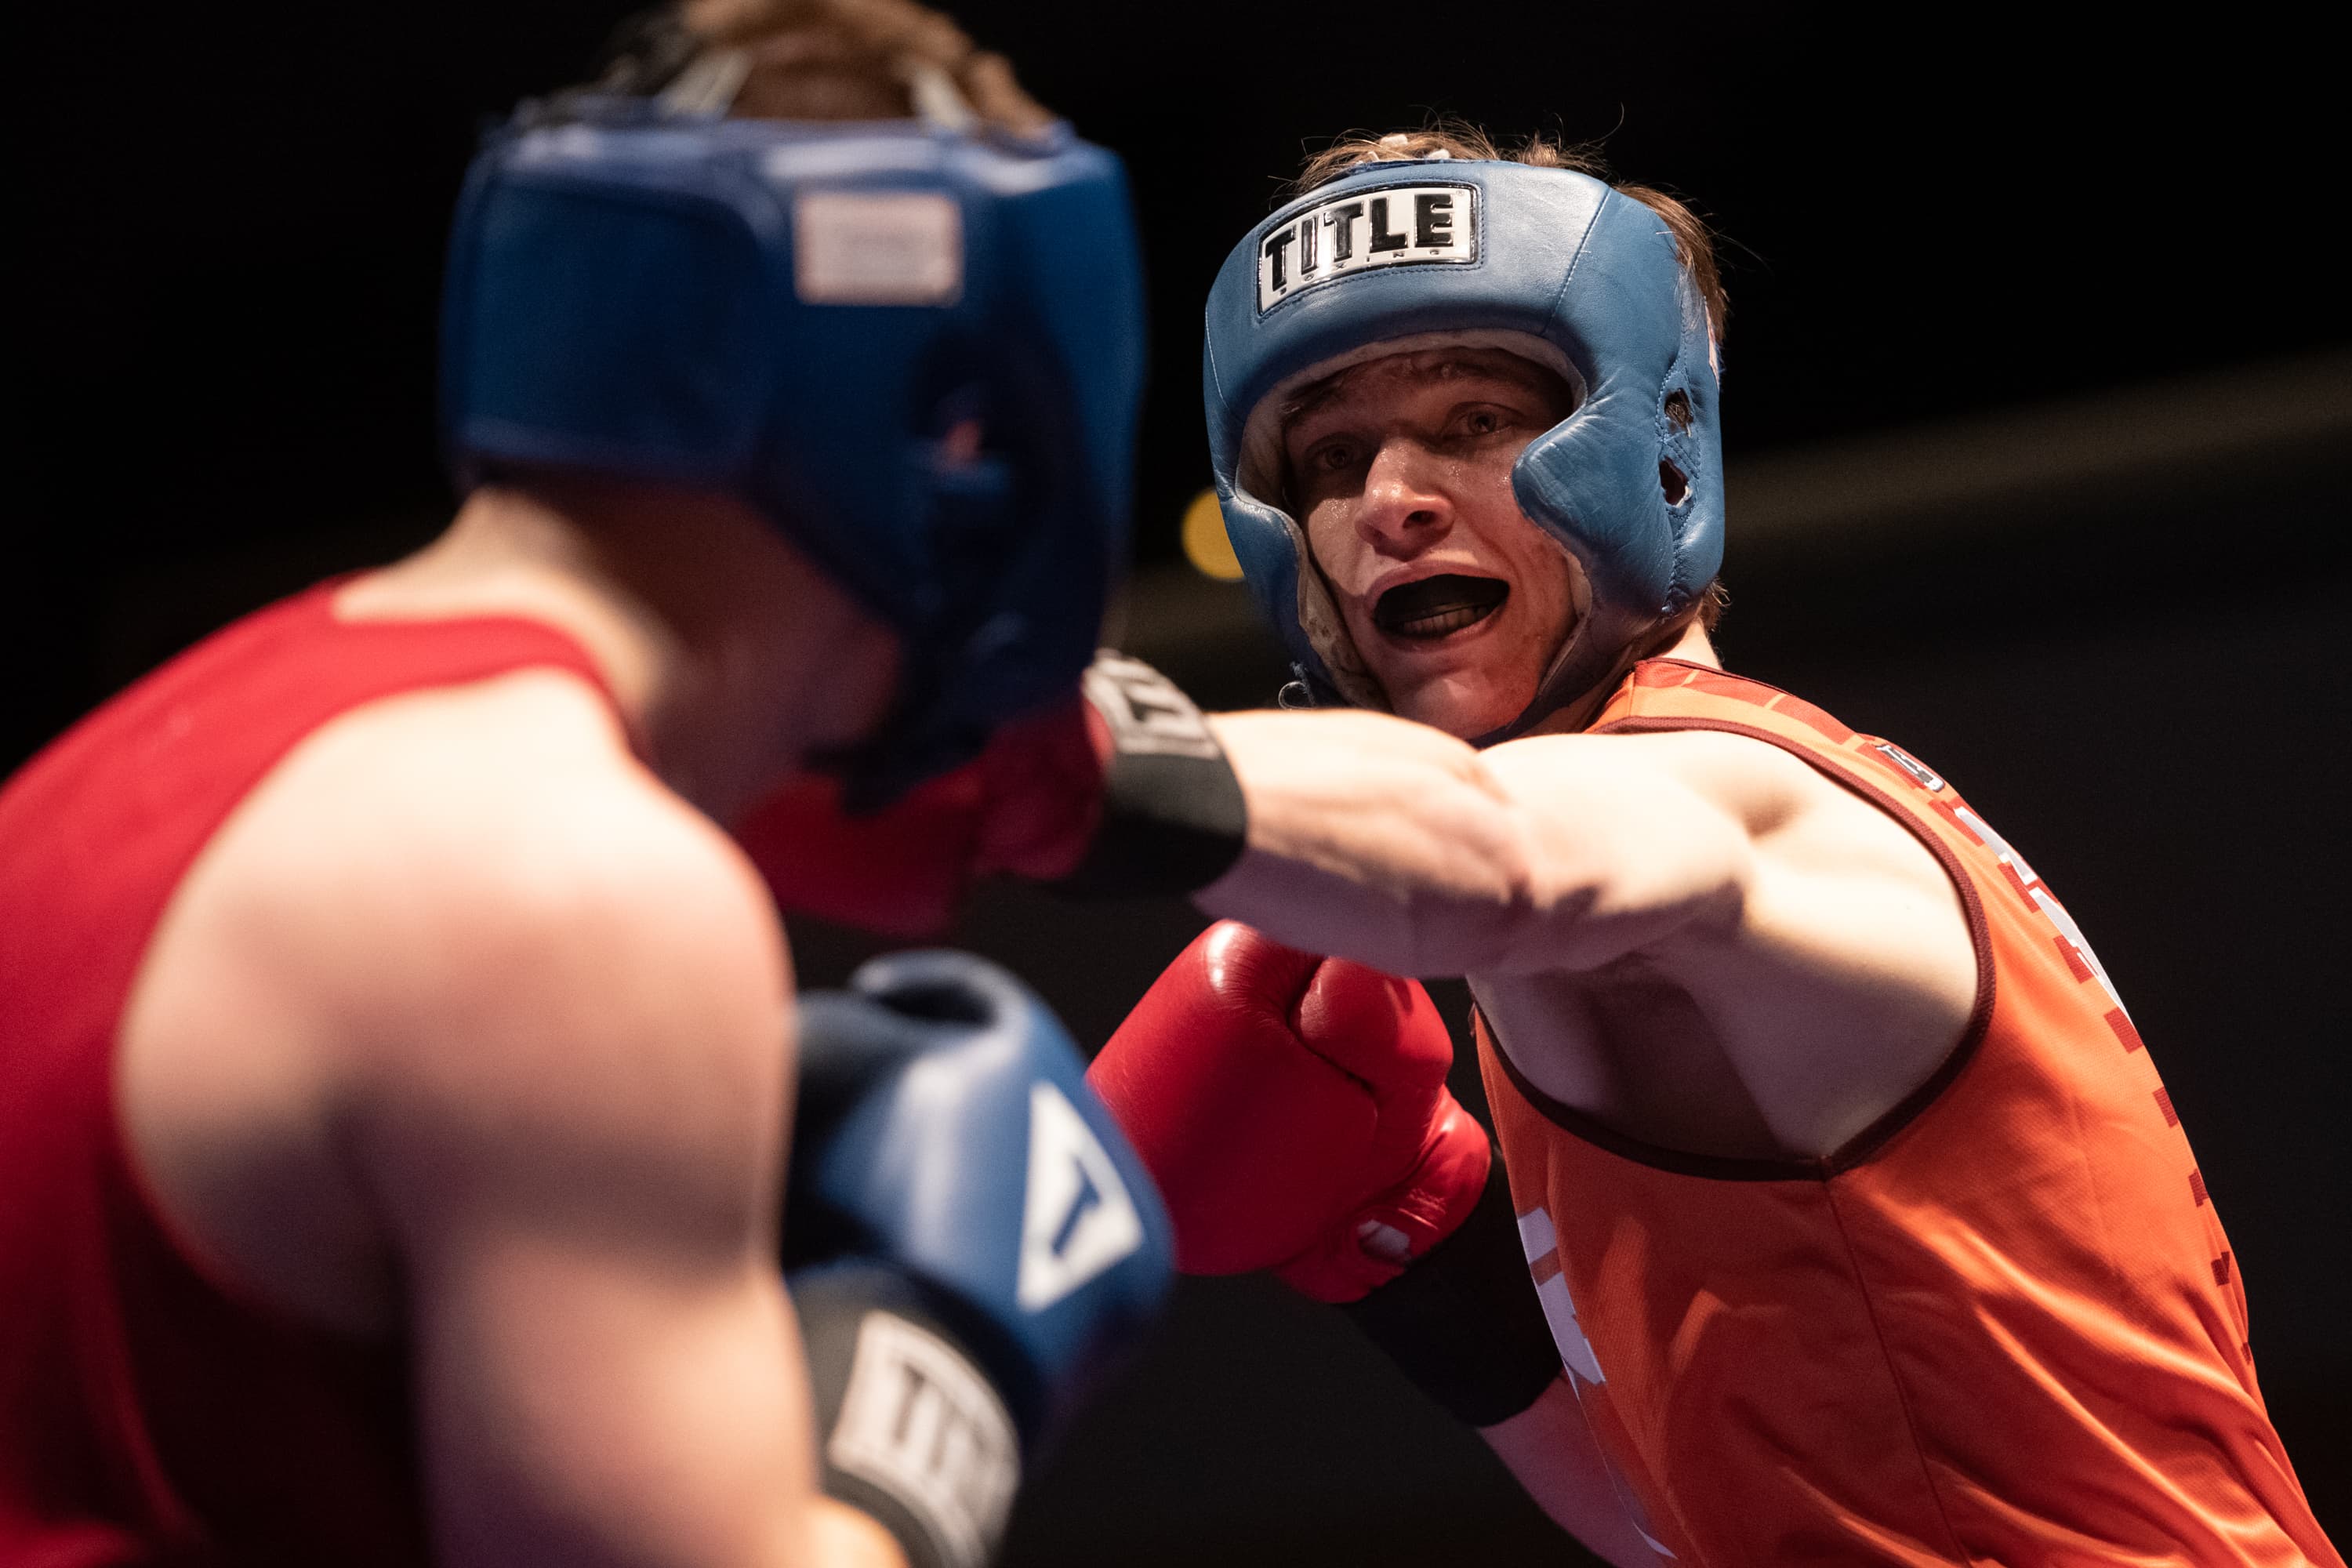 Syracuse graduate student Jeff Frelier fights against Iowa State's Brandon Peck in the championship match in 178-pound bracket at the Goldstein Auditorium on March 24, 2019. Syracuse University hosted the United States Intercollegiate Boxing Association's national championship this past weekend.